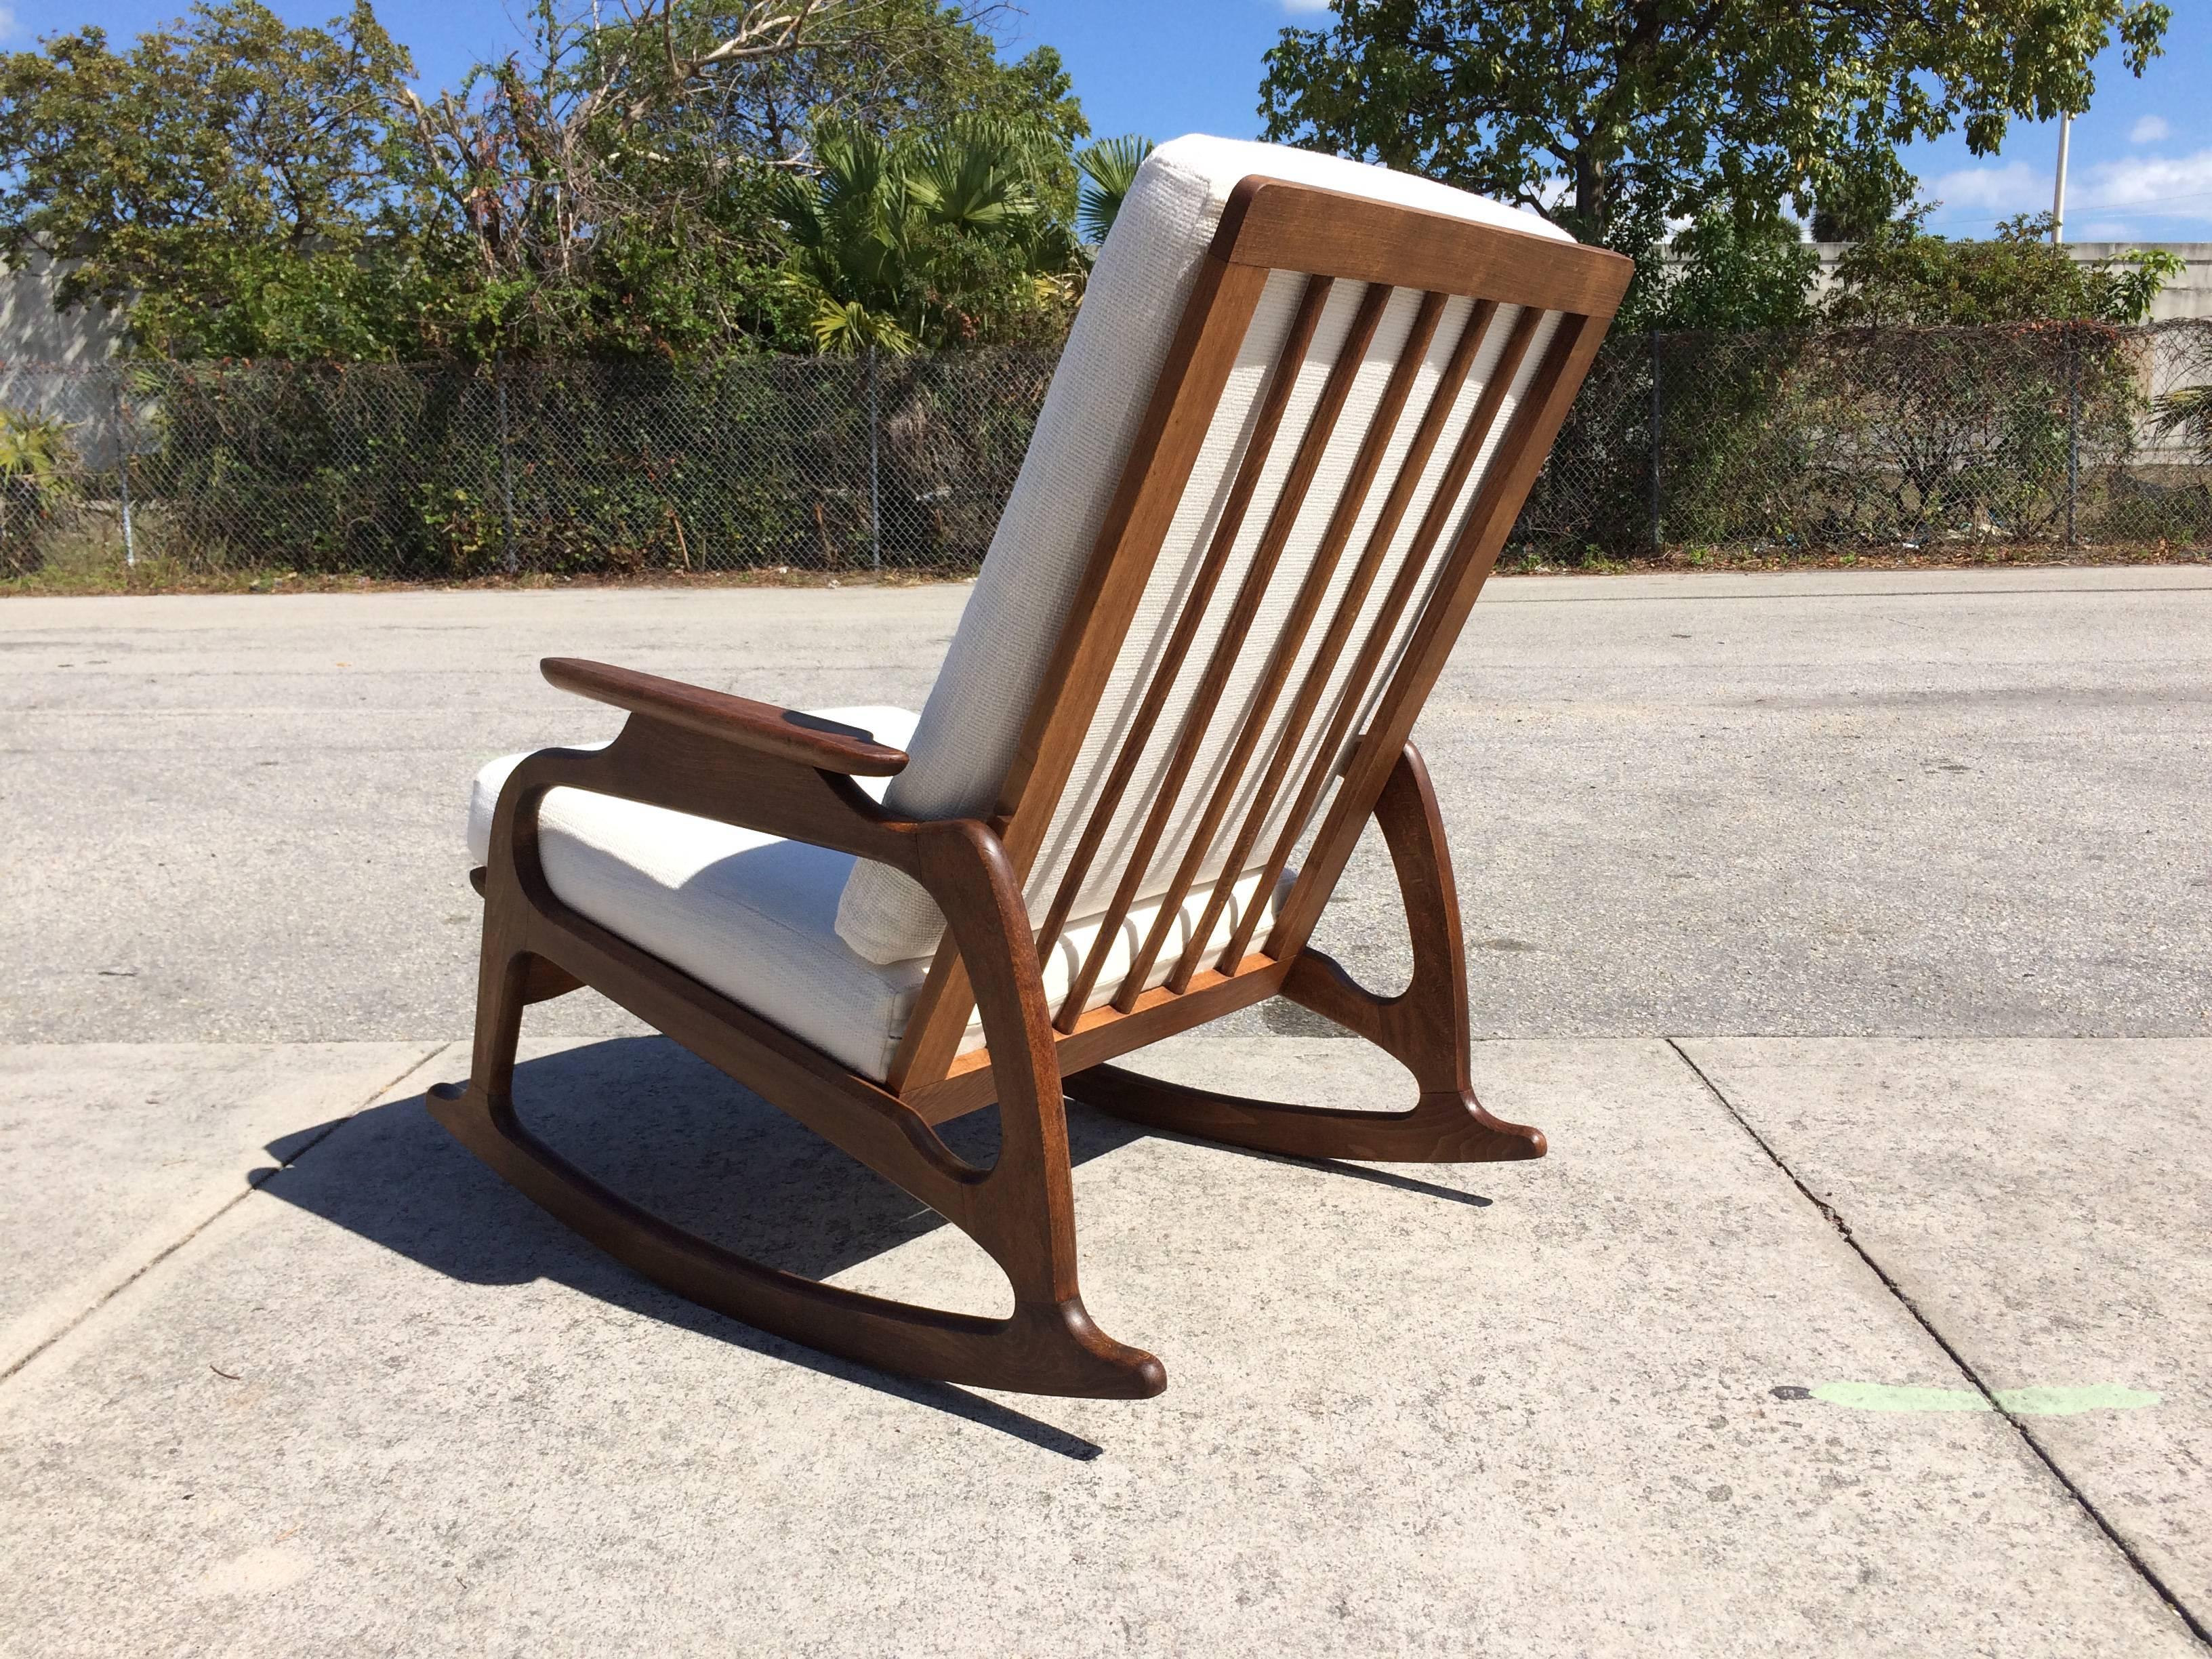 Solid wood construction with fabric cushions. Very cool retro rocking chair.